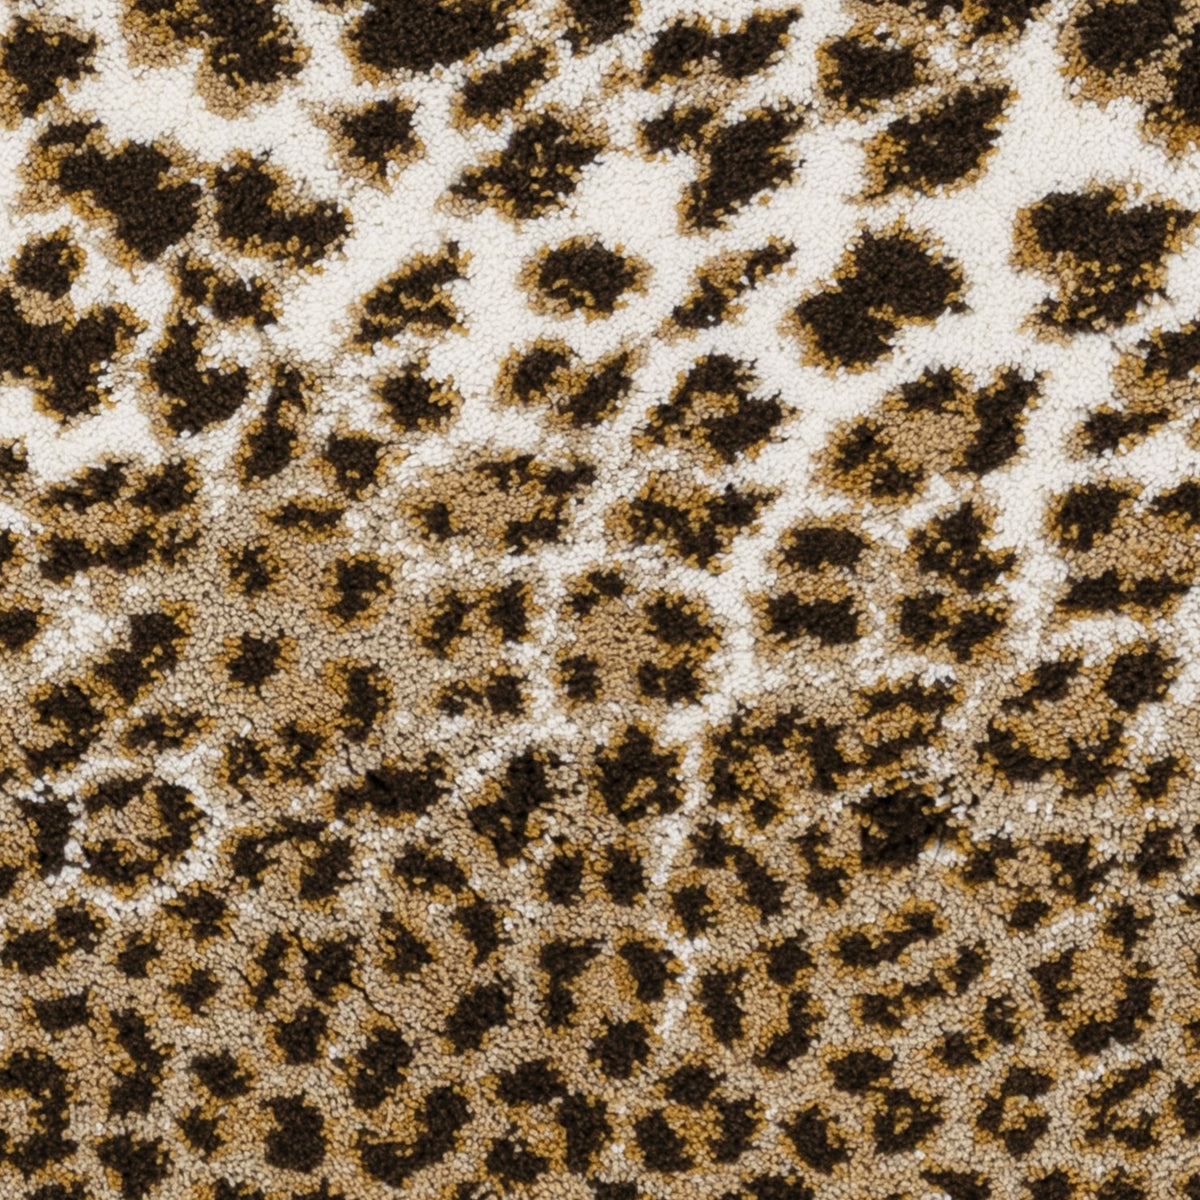 Swatch Sample of Abyss Habidecor Feline Bath Rug in Color Mustang (795)